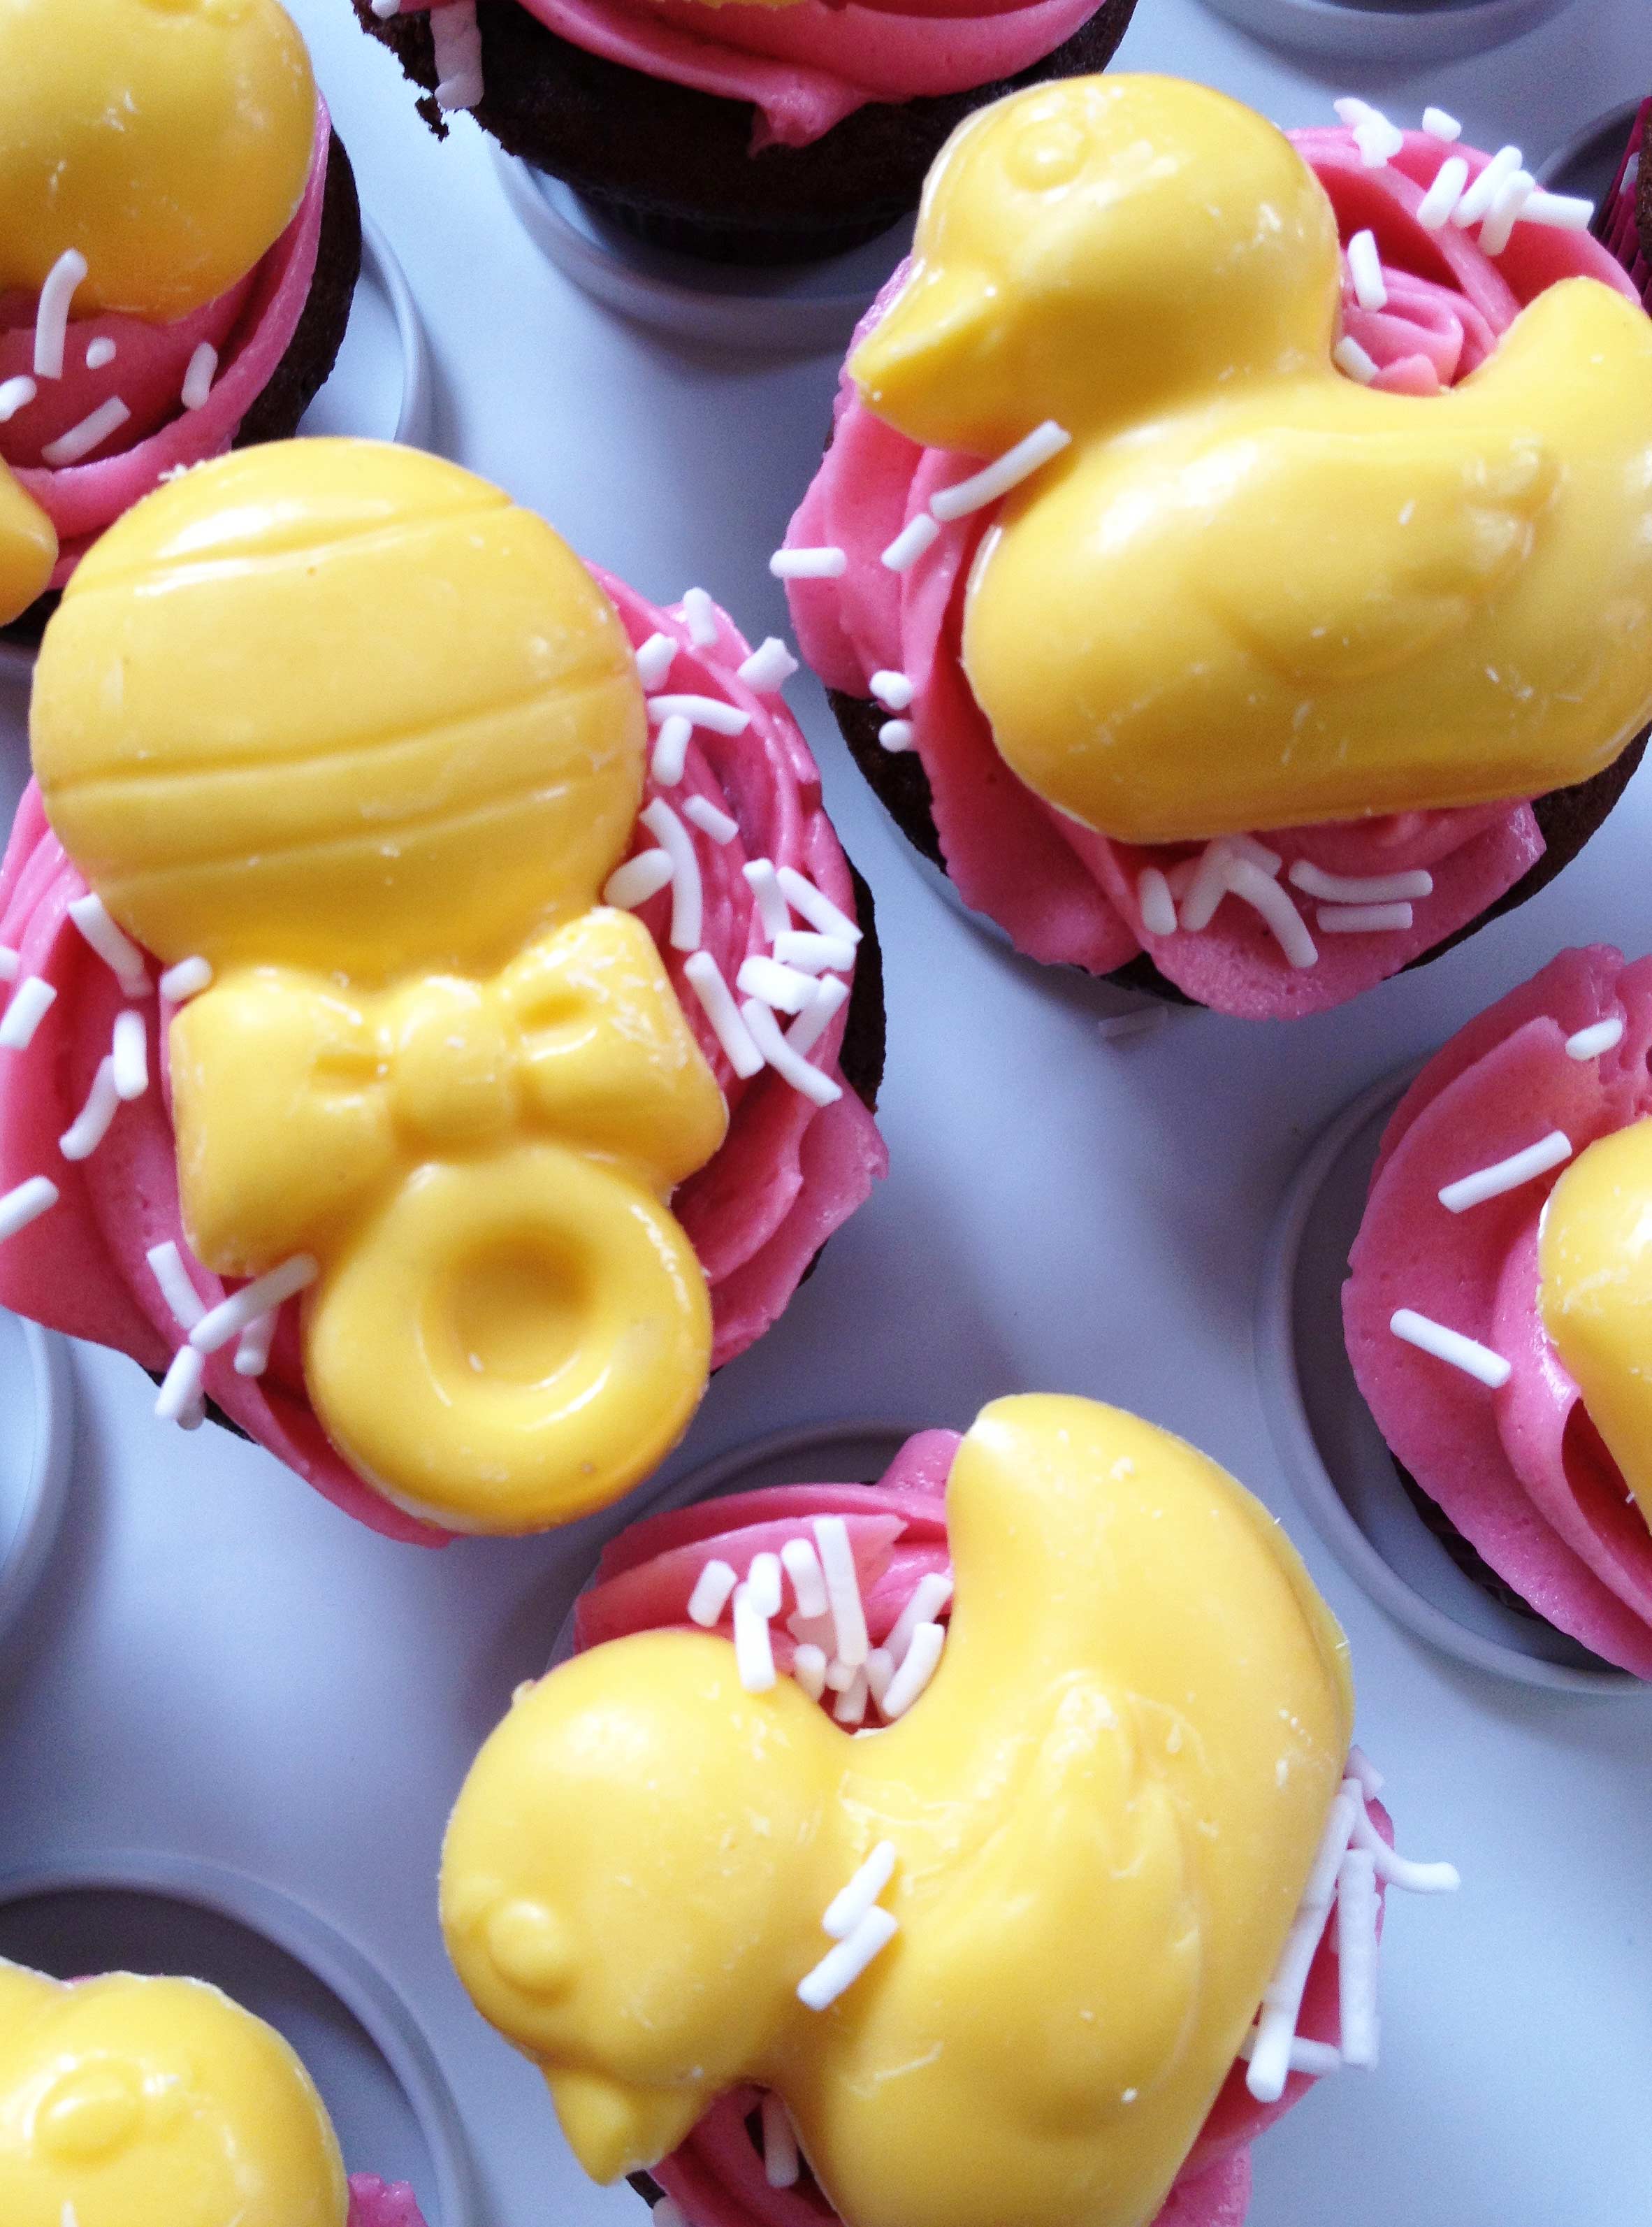 Yellow duckies and rattles cupcakes